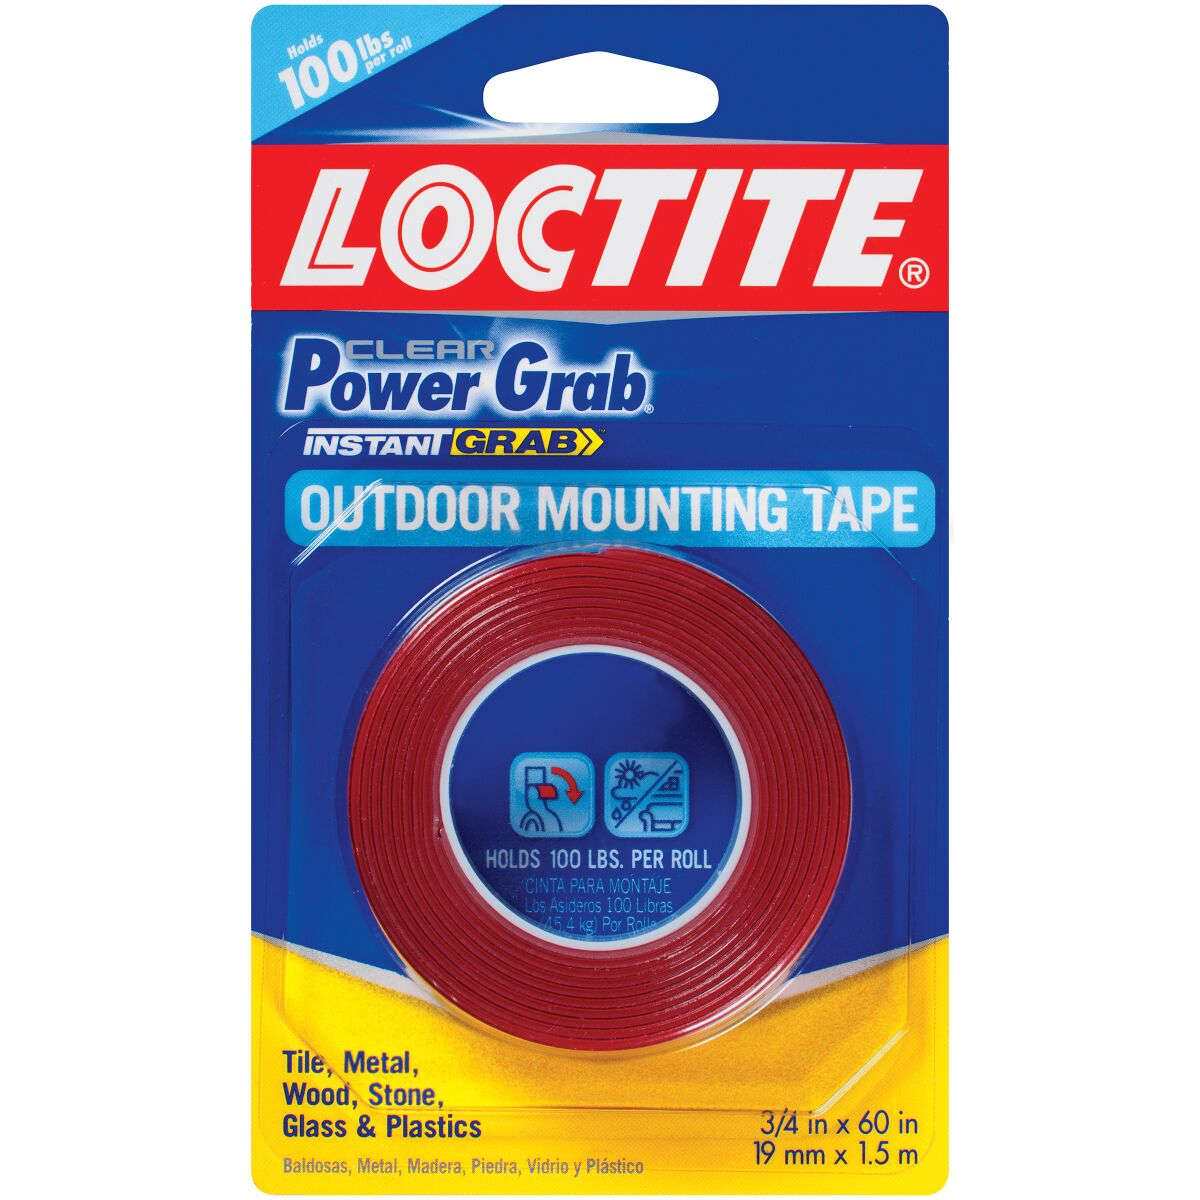 Loctite Power Grab Outdoor Mounting Tape